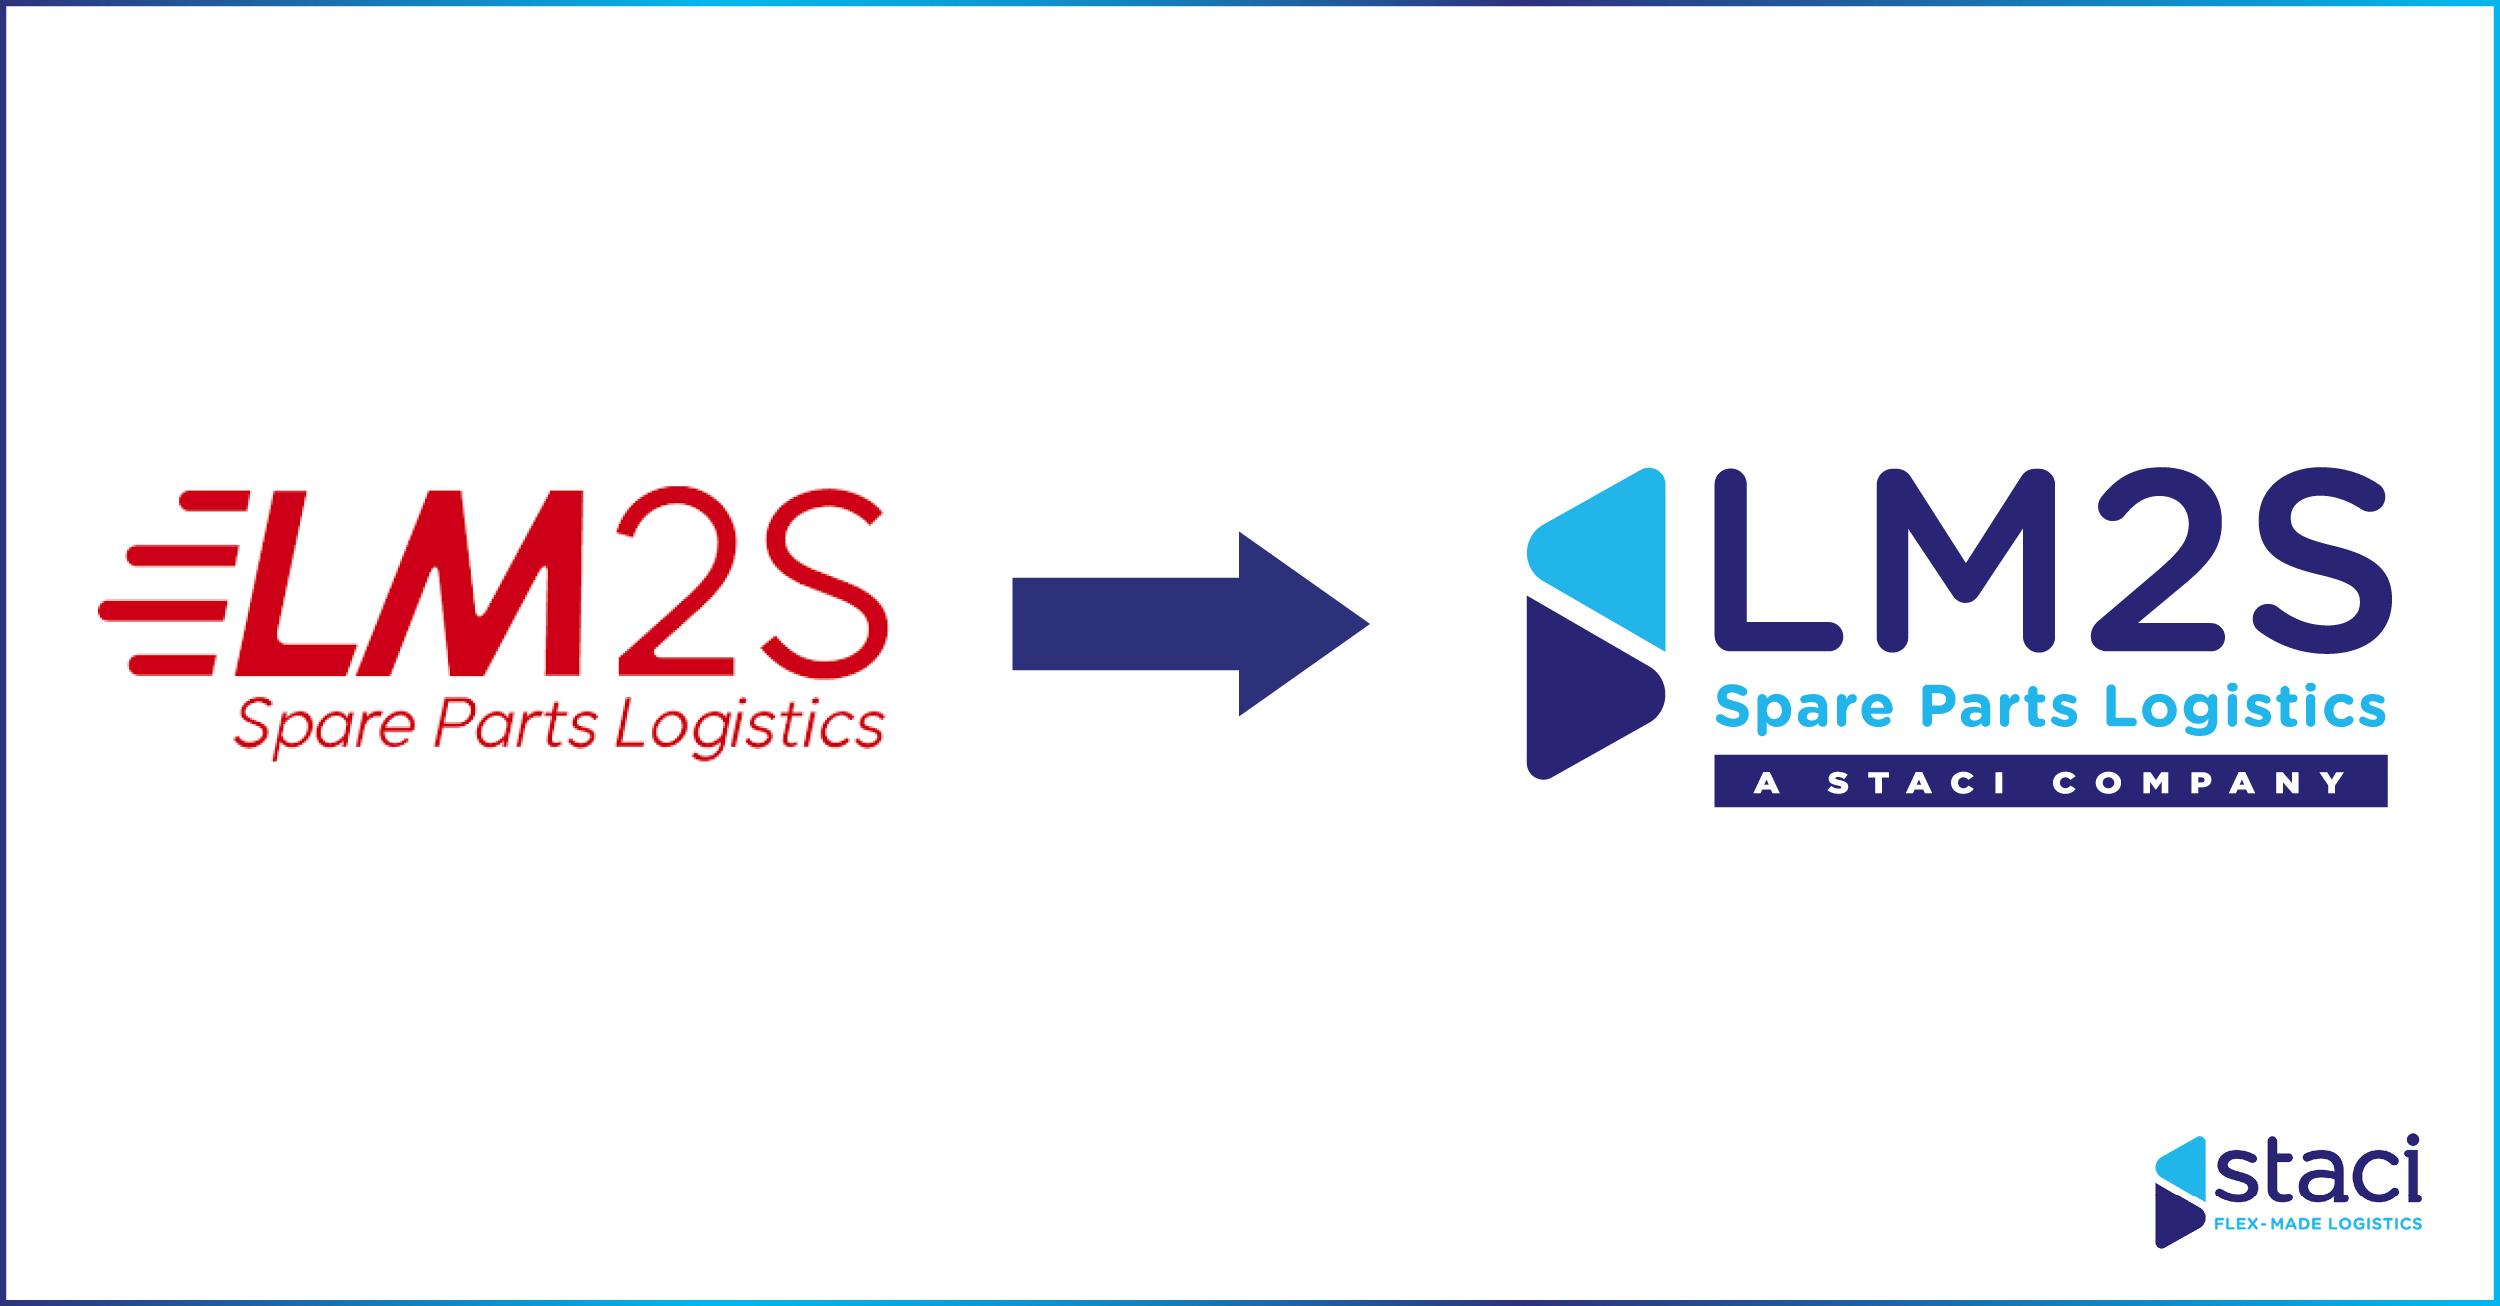 Staci Acquires Lm2s In Order To Reinforce Its Expertise In Last Mile Delivery Solutions And